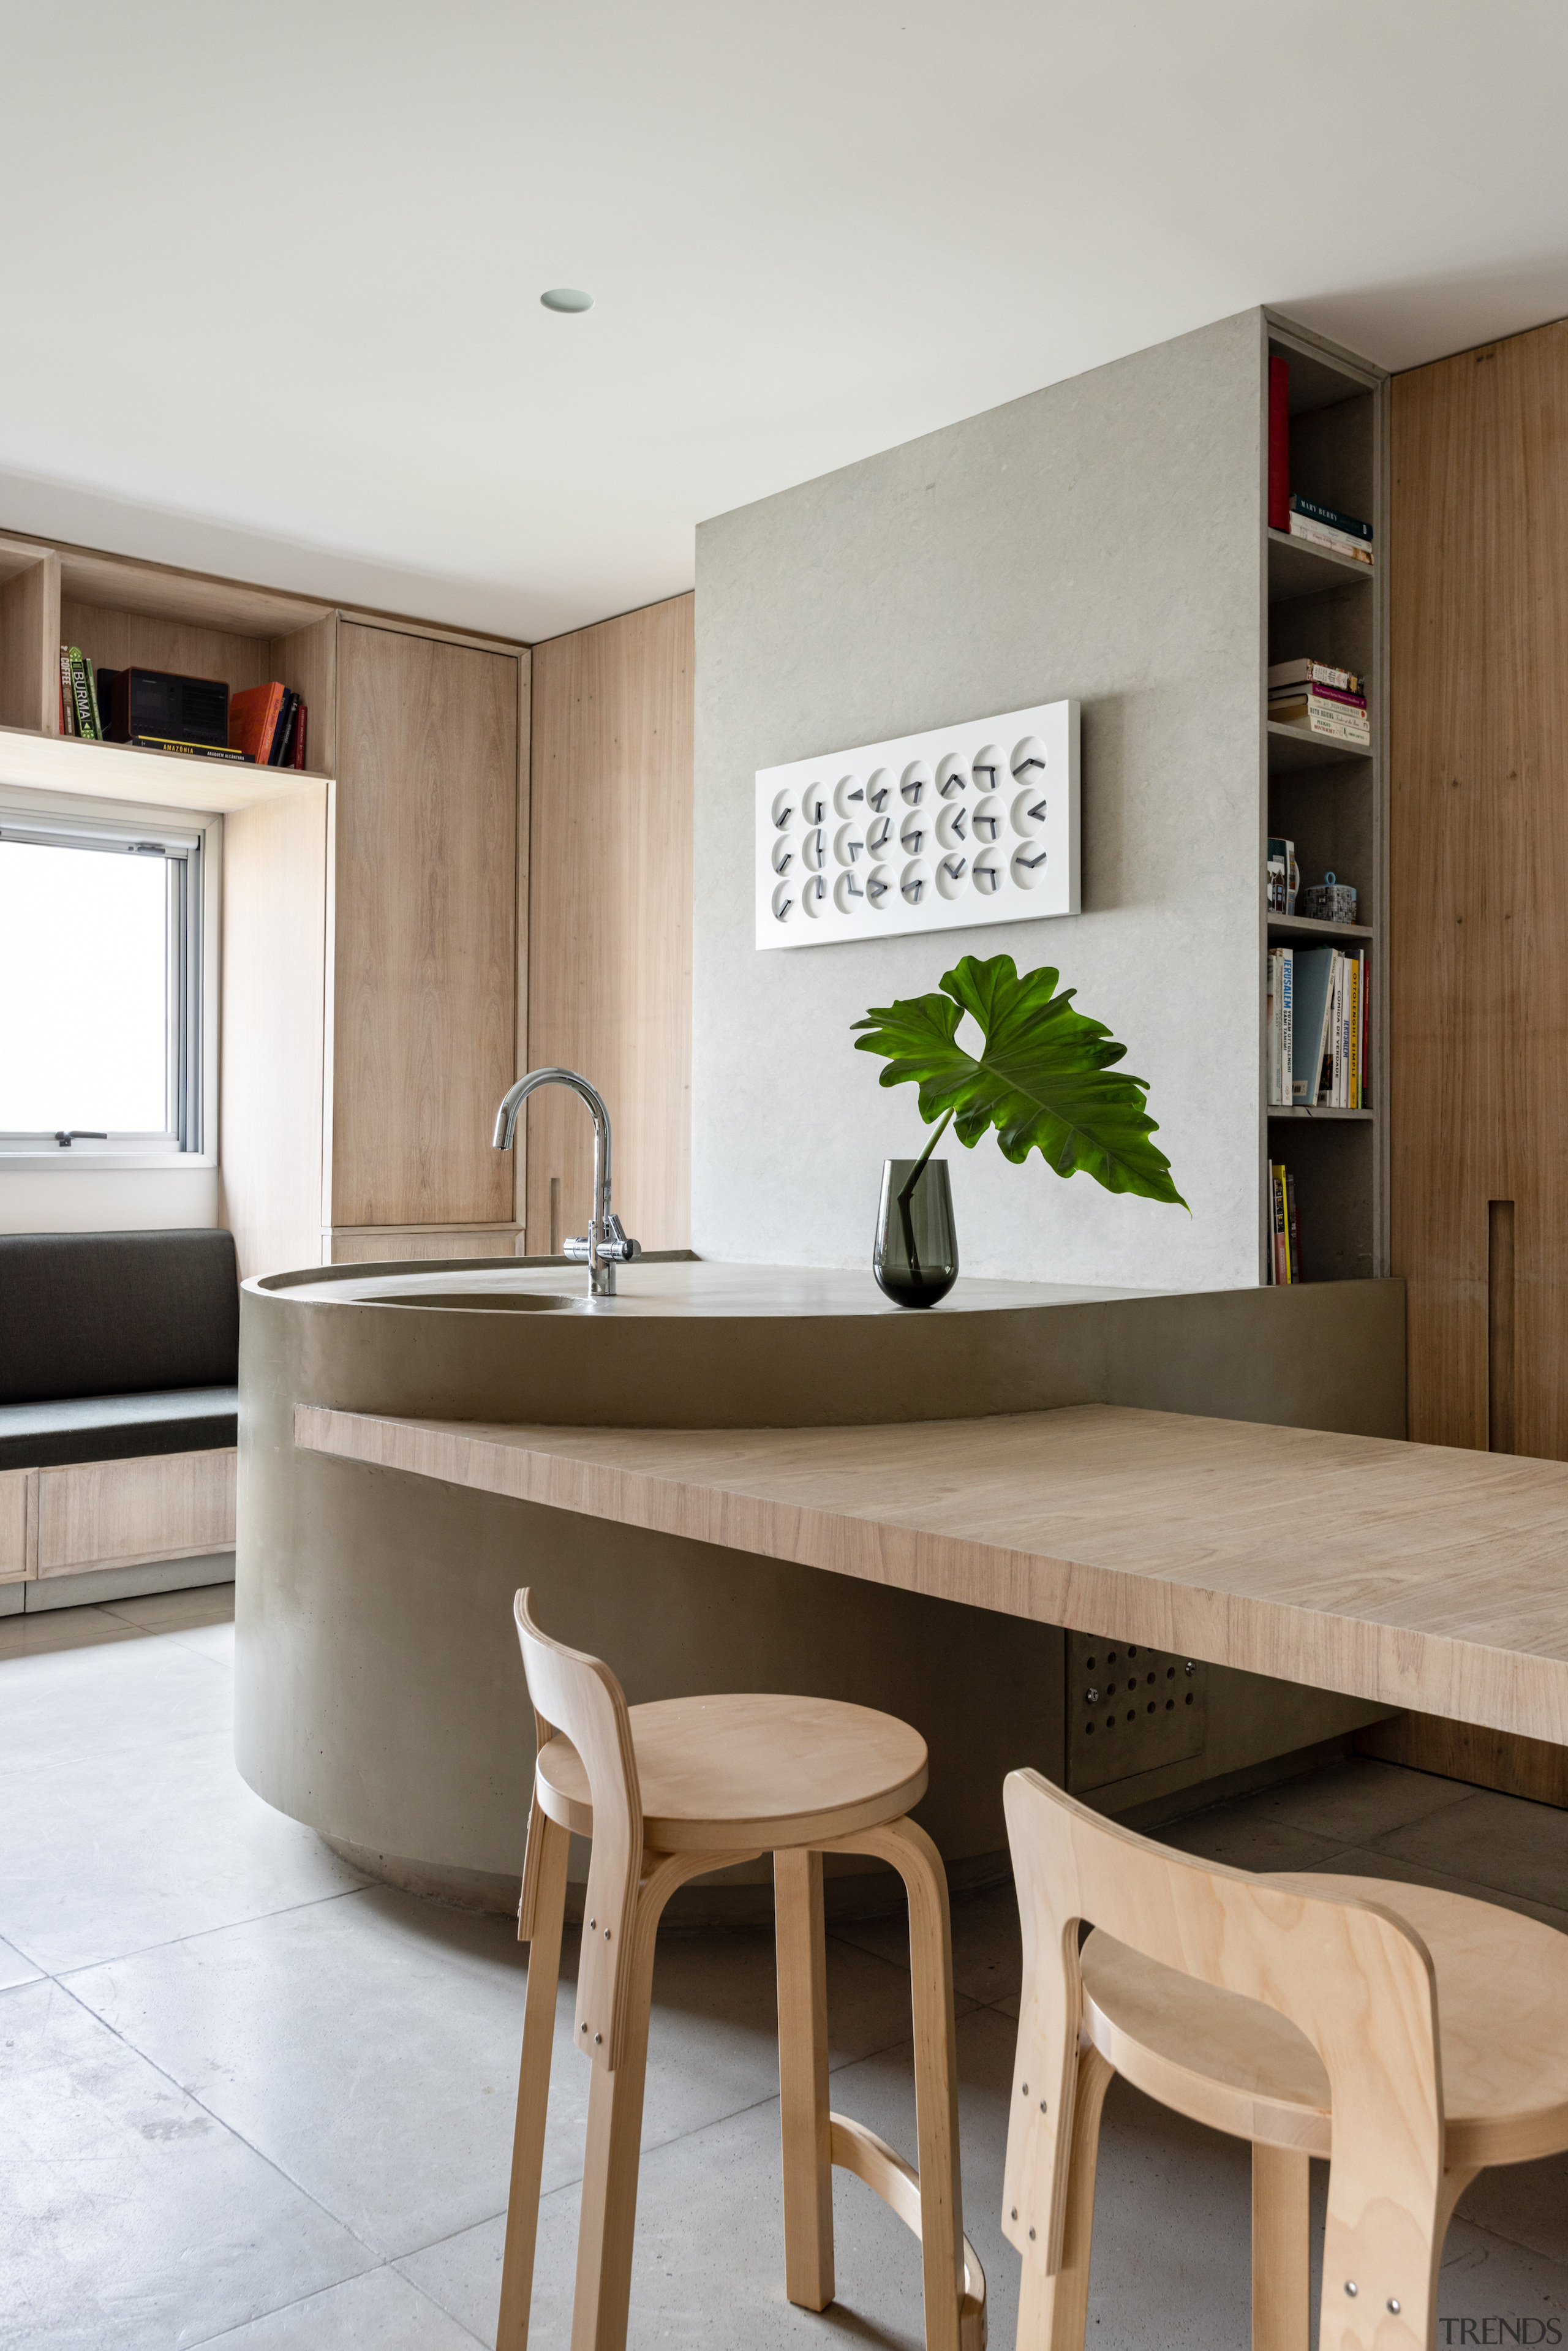 Kitchen and seating. - Apartment meets art house 